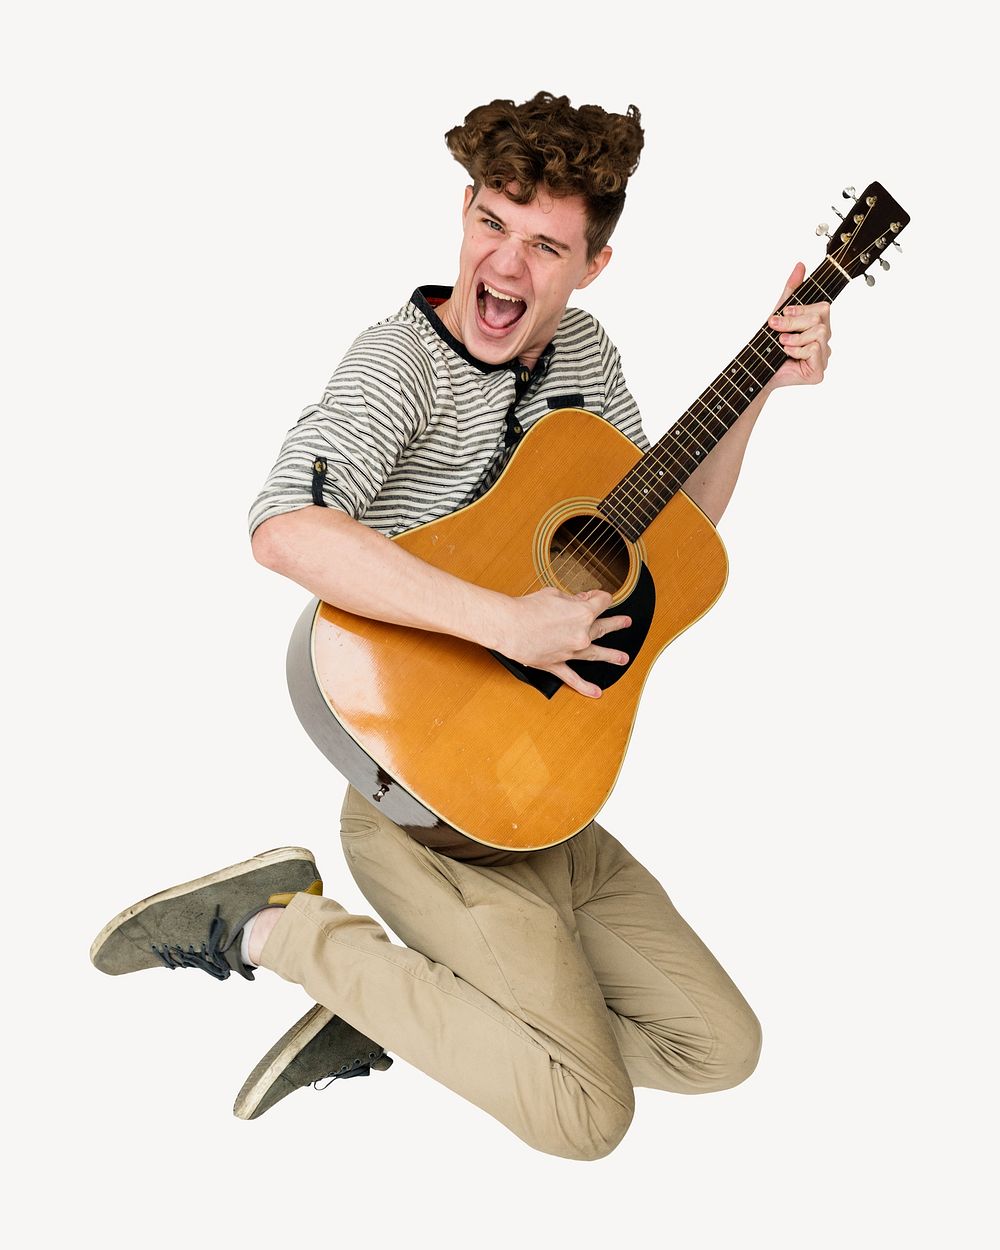 Man with guitar smiling and jumping isolated image